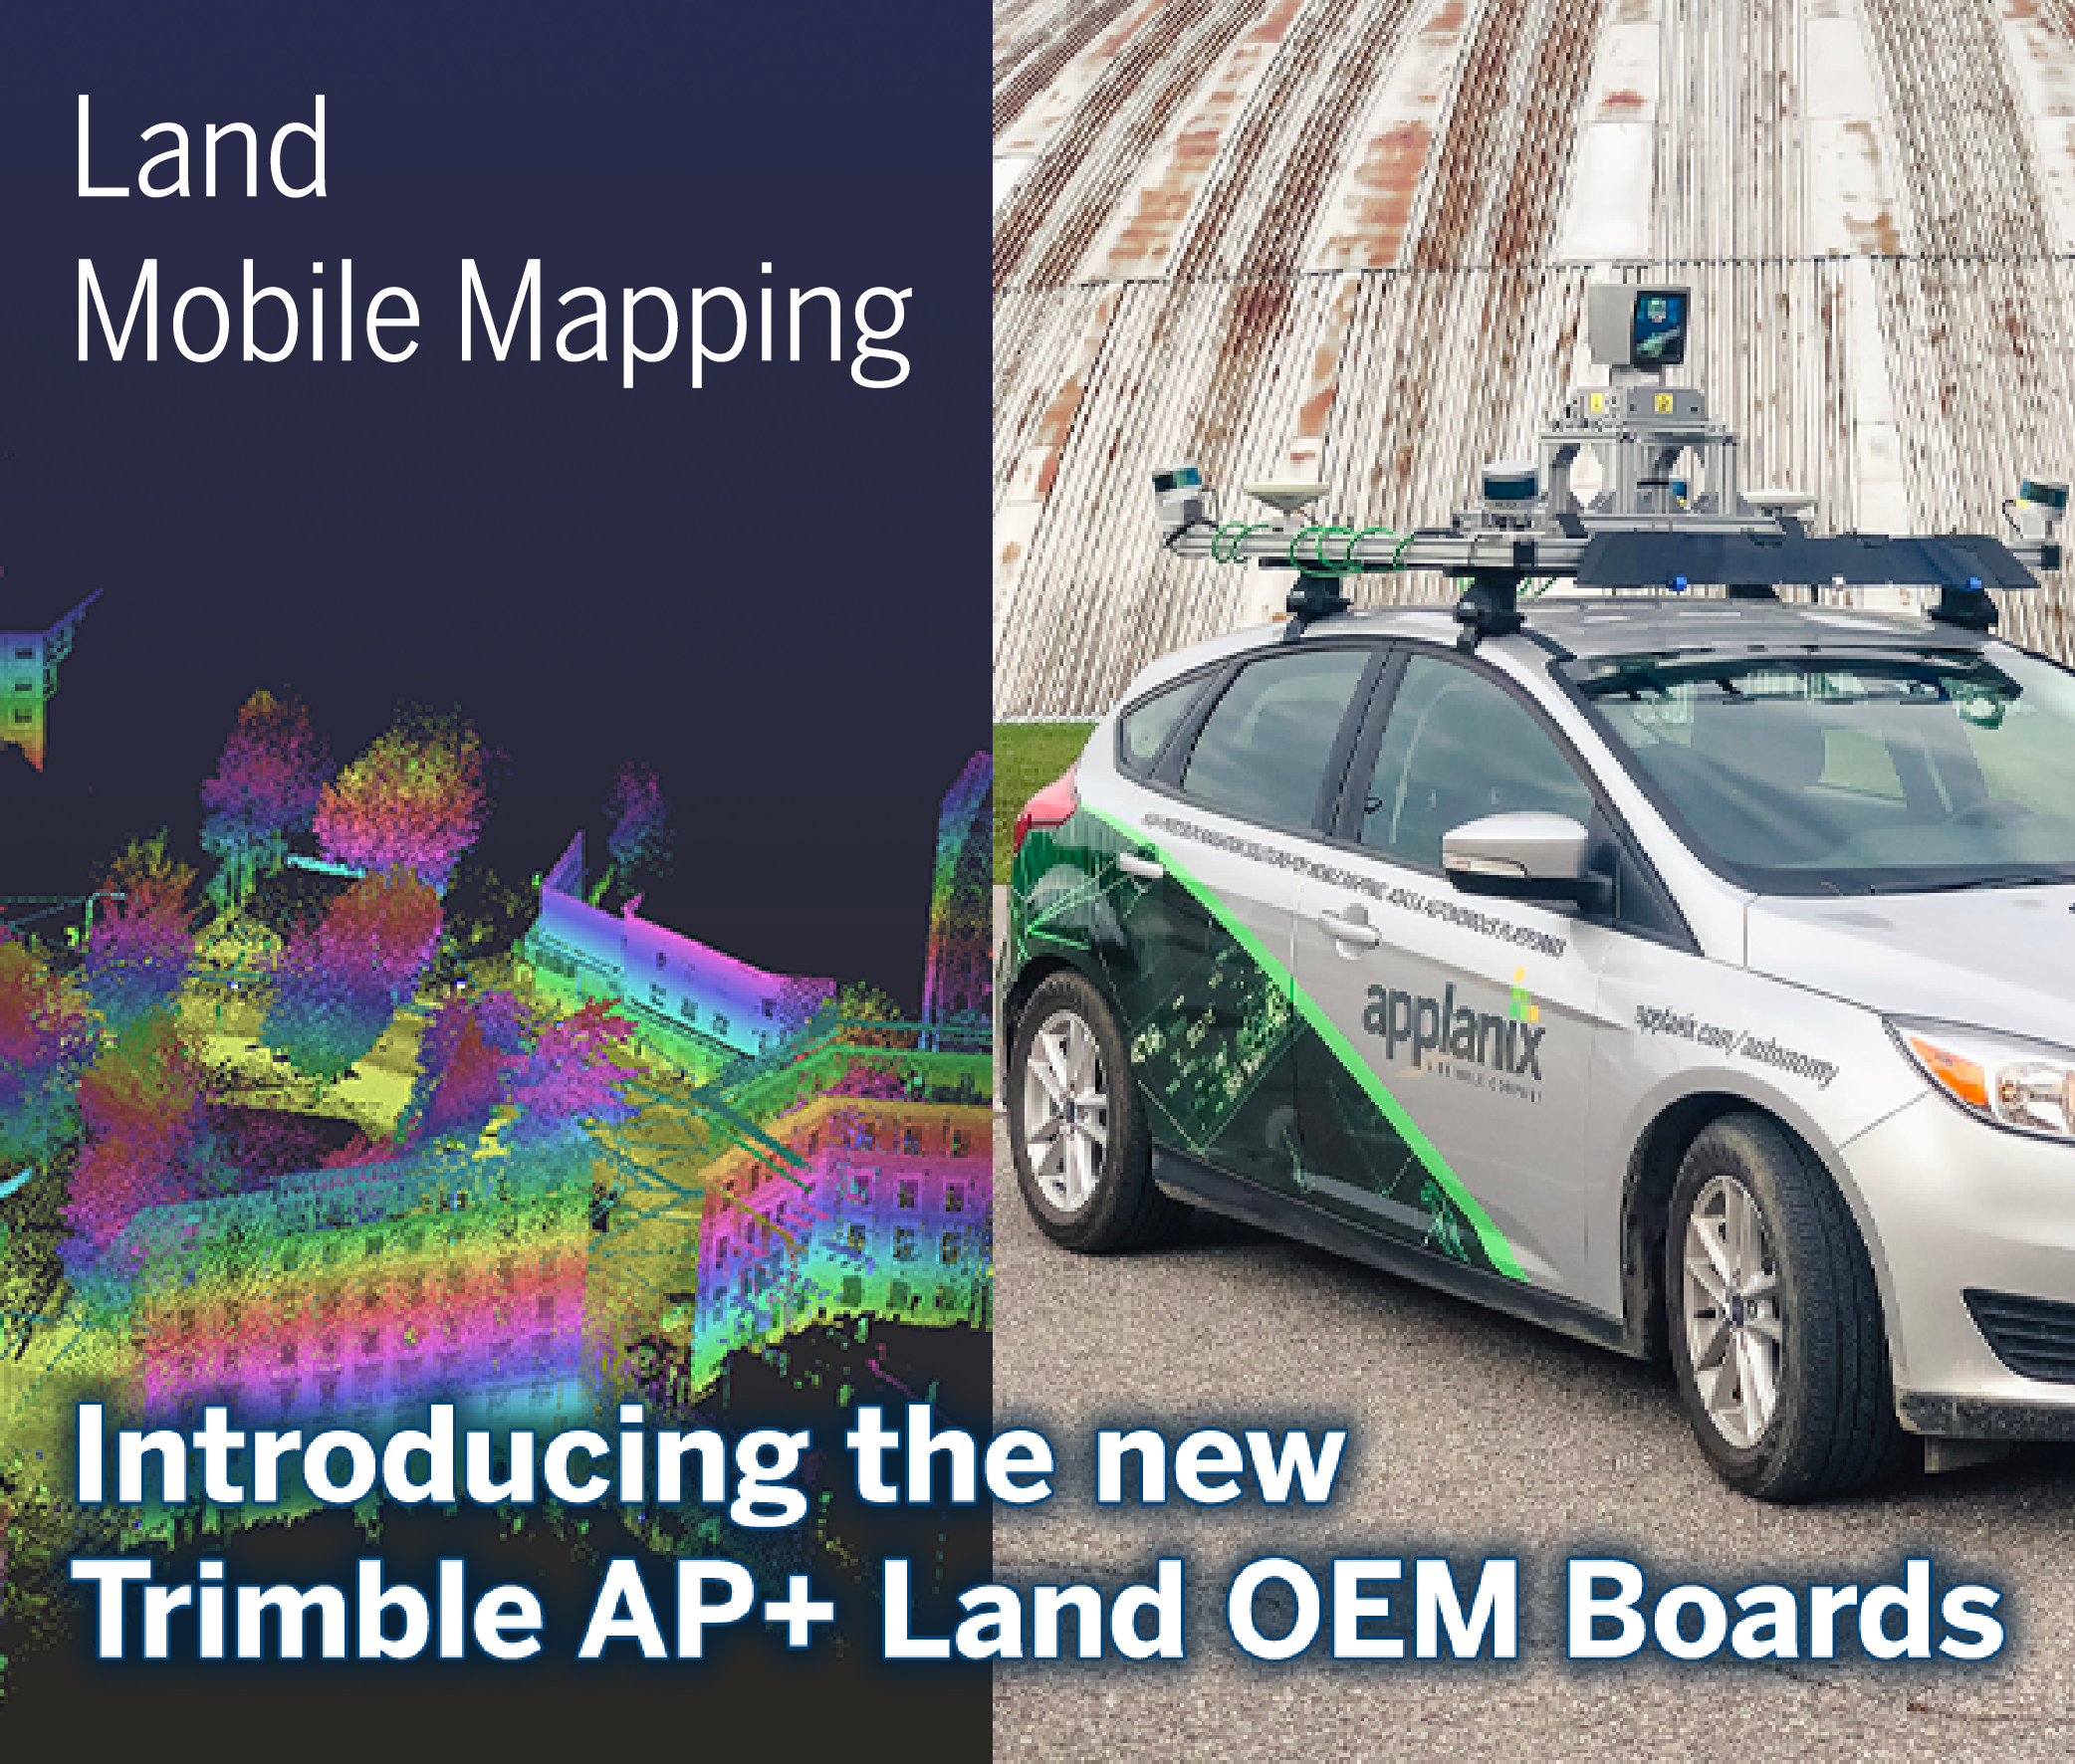 Trimble Introduces Next-Generation OEM Solution for Mobile Mapping Applications Using GNSS-Inertial Technology